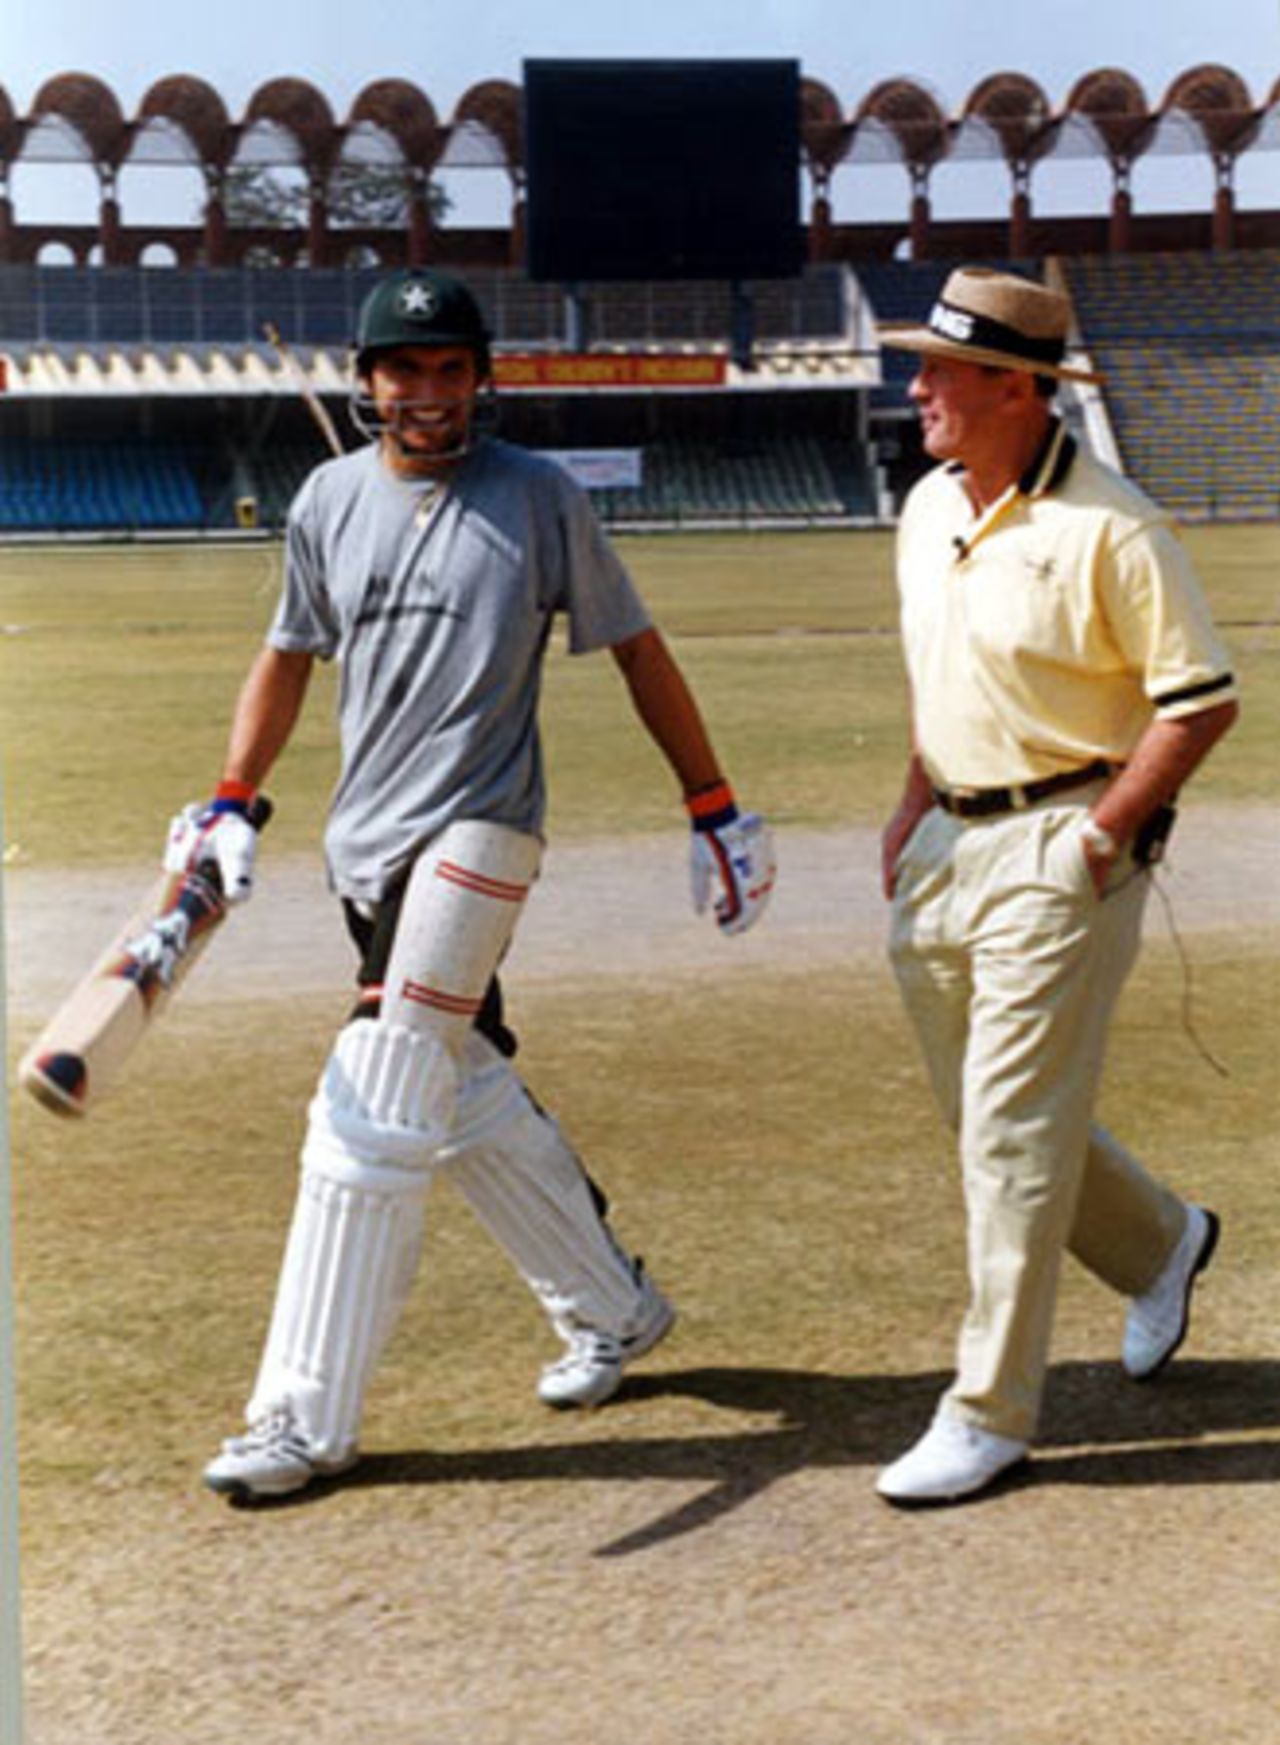 Geoff Boycott and Shahid Afridi share a lighter moment, Gaddafi Stadium Lahore, during the Feb 2001 coaching session